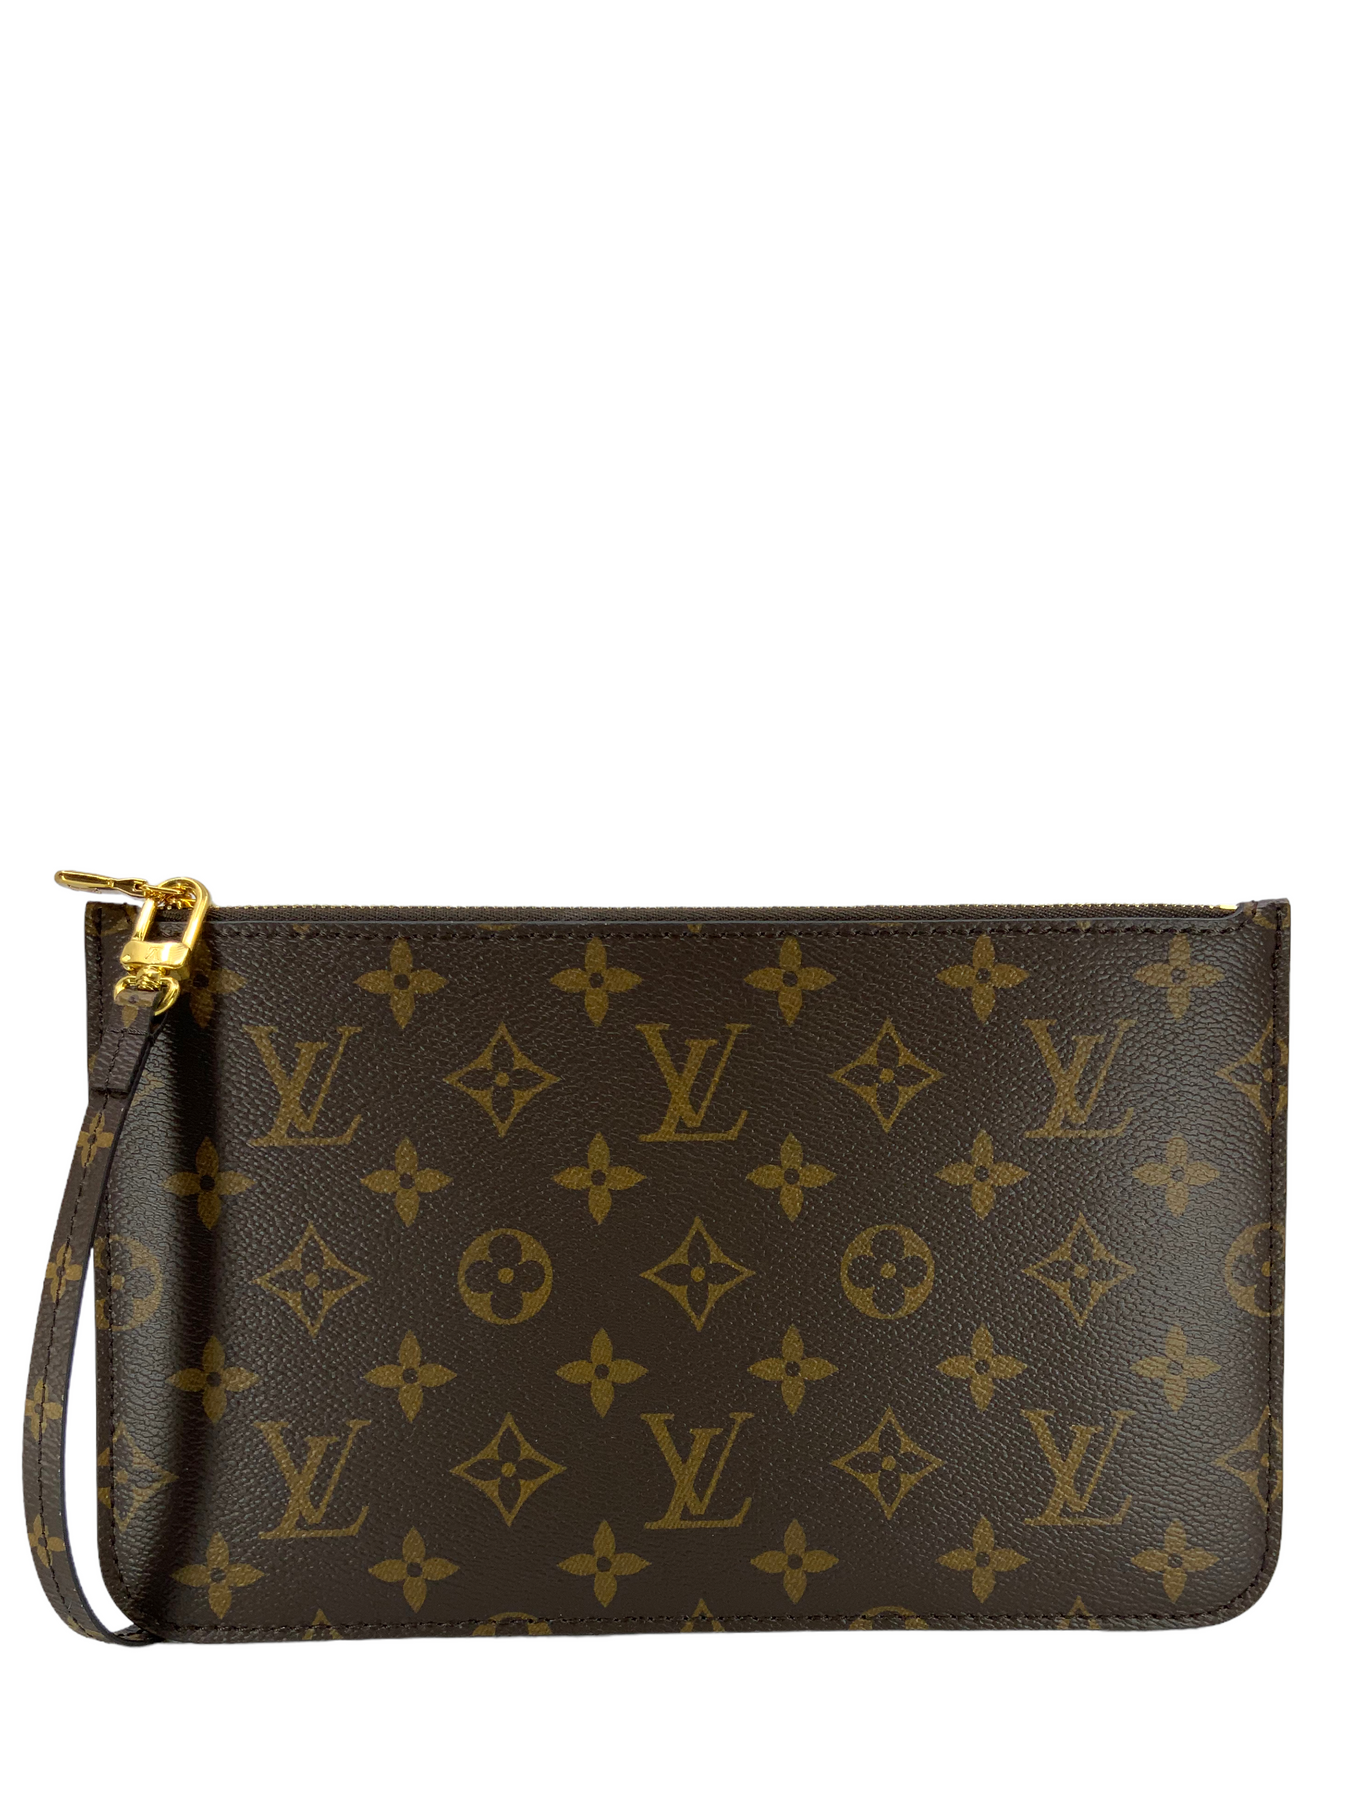 Louis Vuitton Monogram Giant mm Pochette in Like New Condition